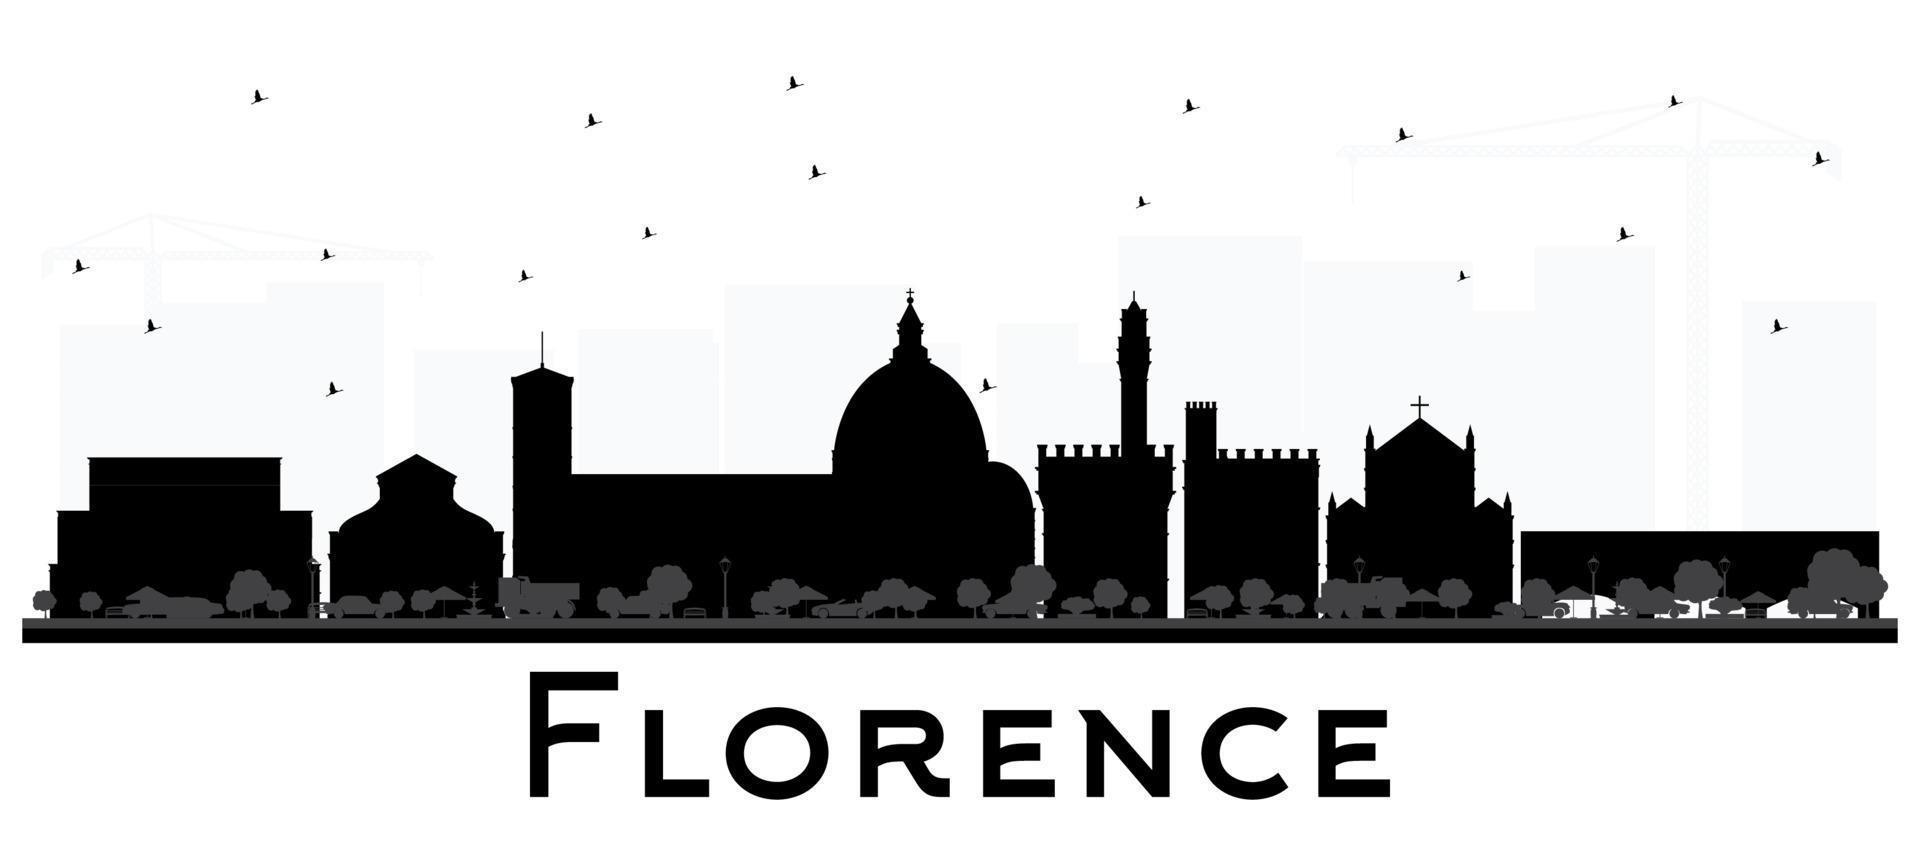 Florence Italy City Skyline Silhouette with Black Buildings Isolated on White. vector